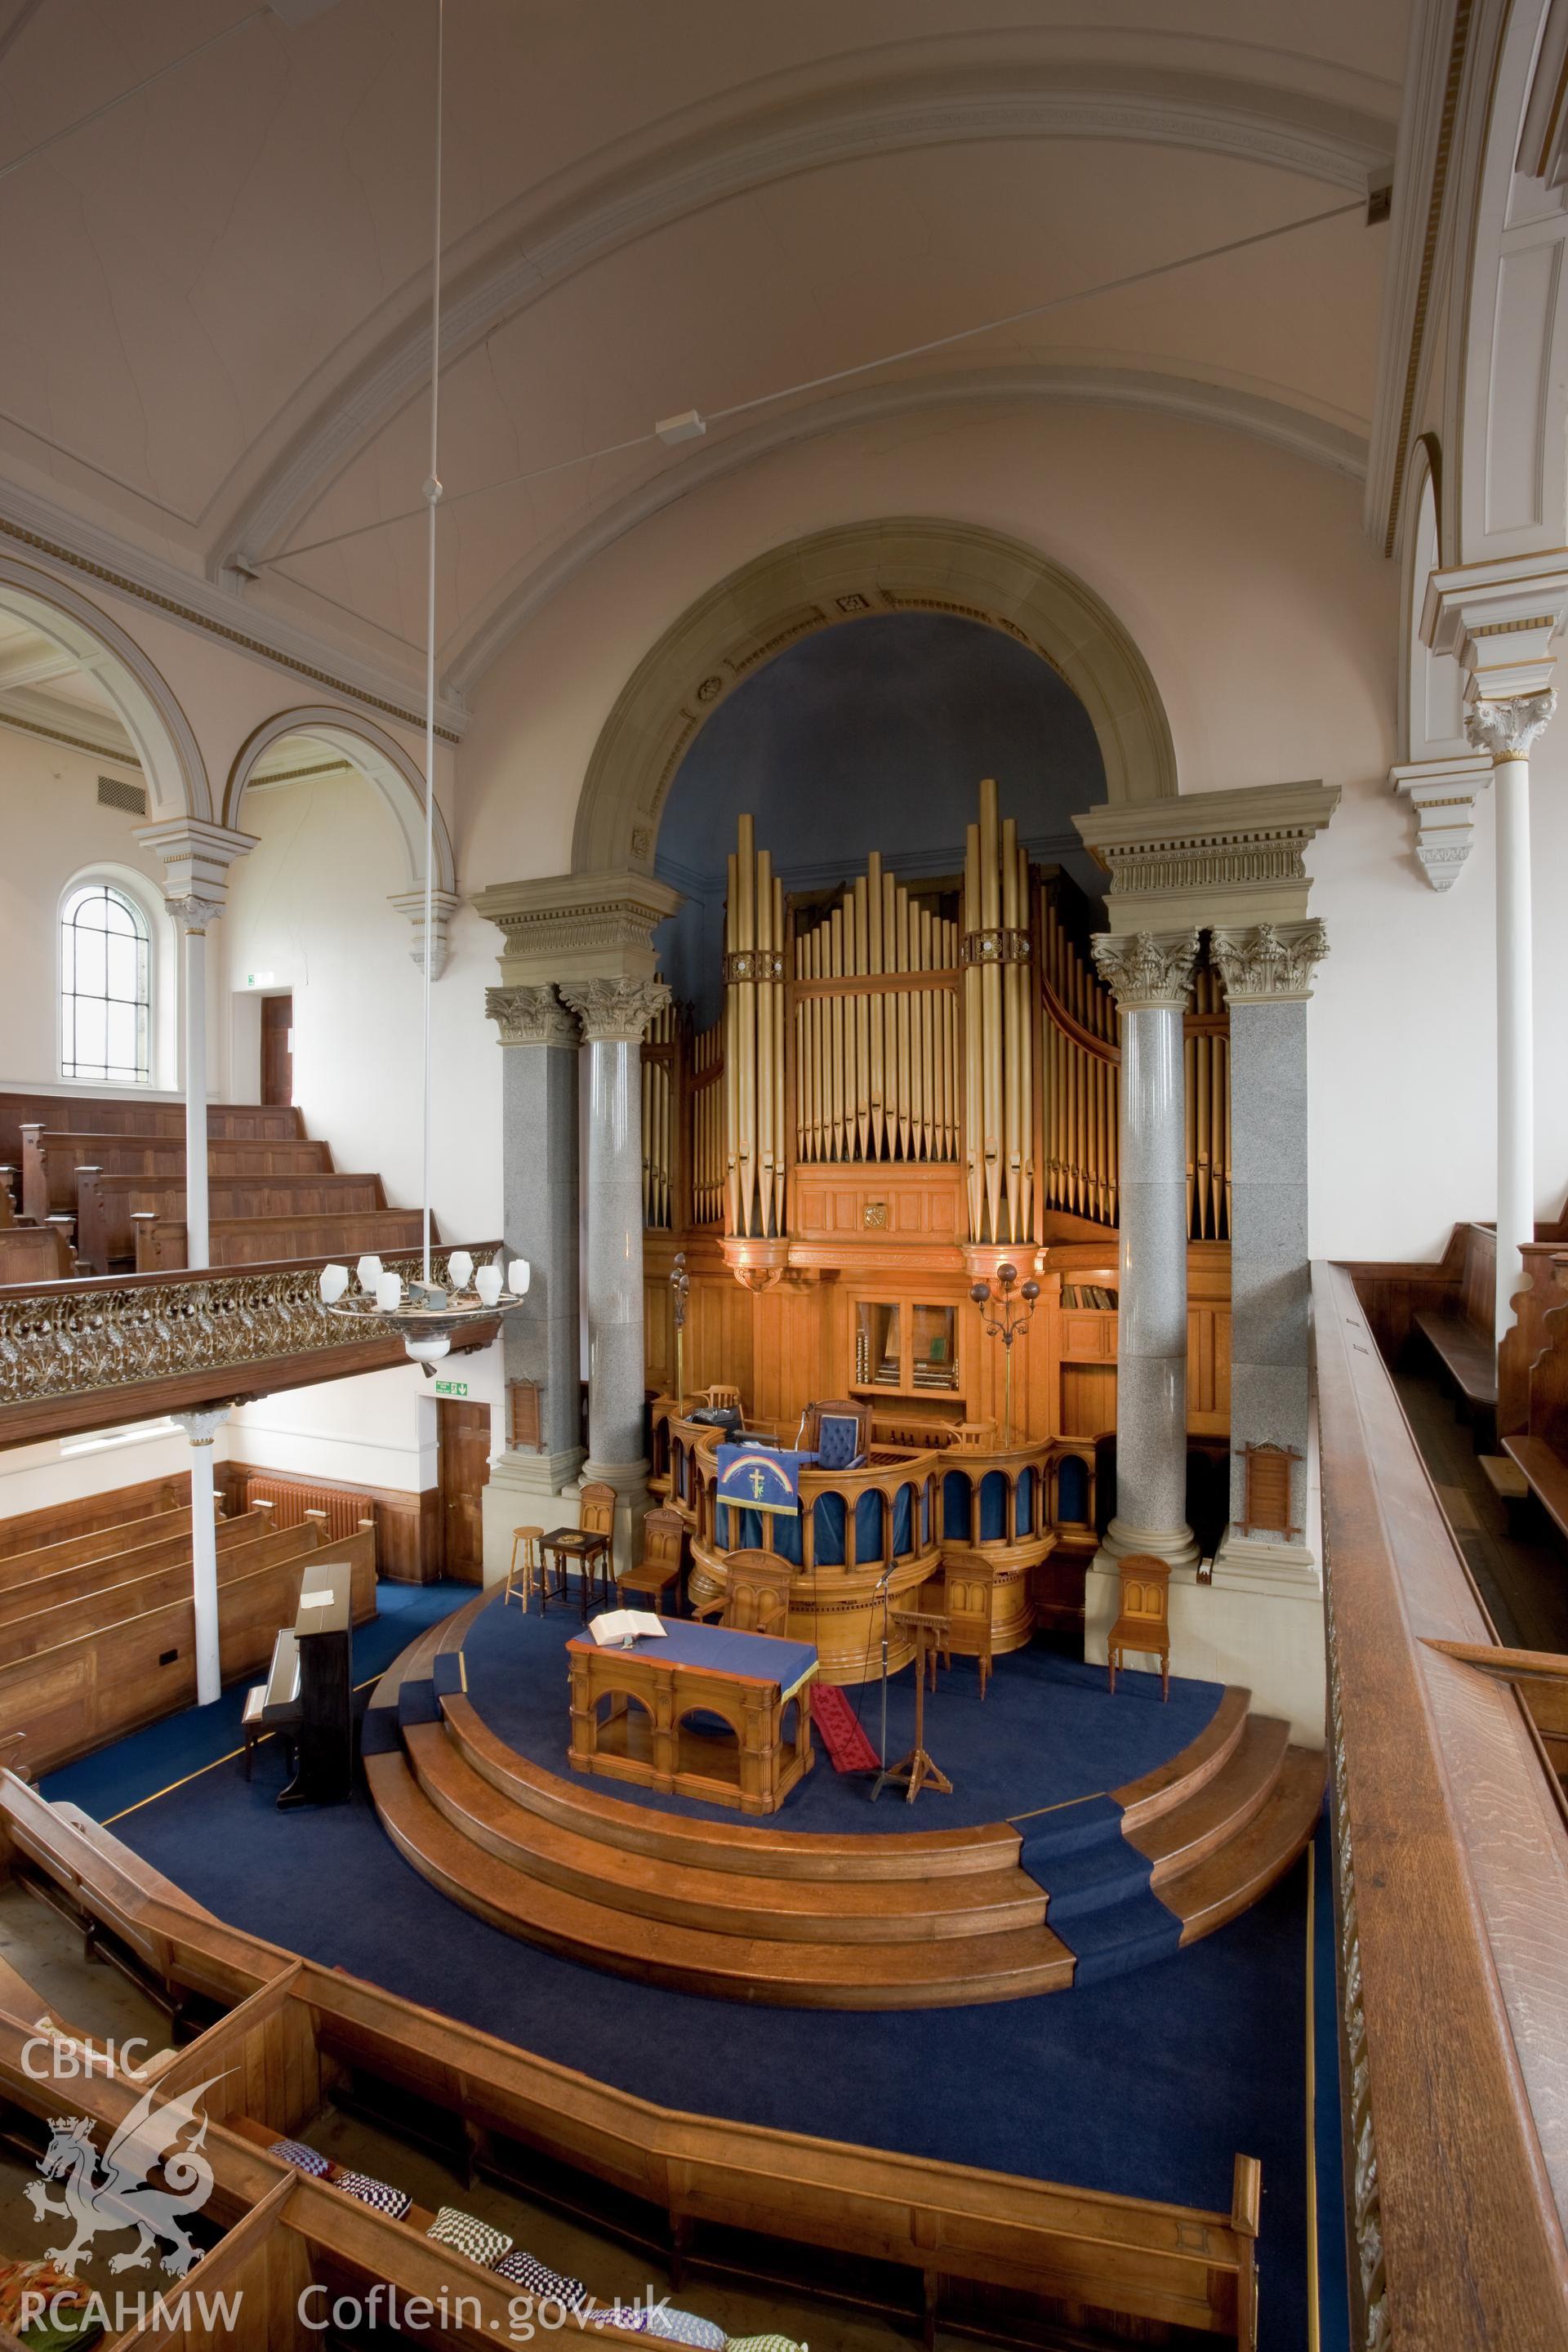 Sedd fawr and organ from the east, with interior lighting.